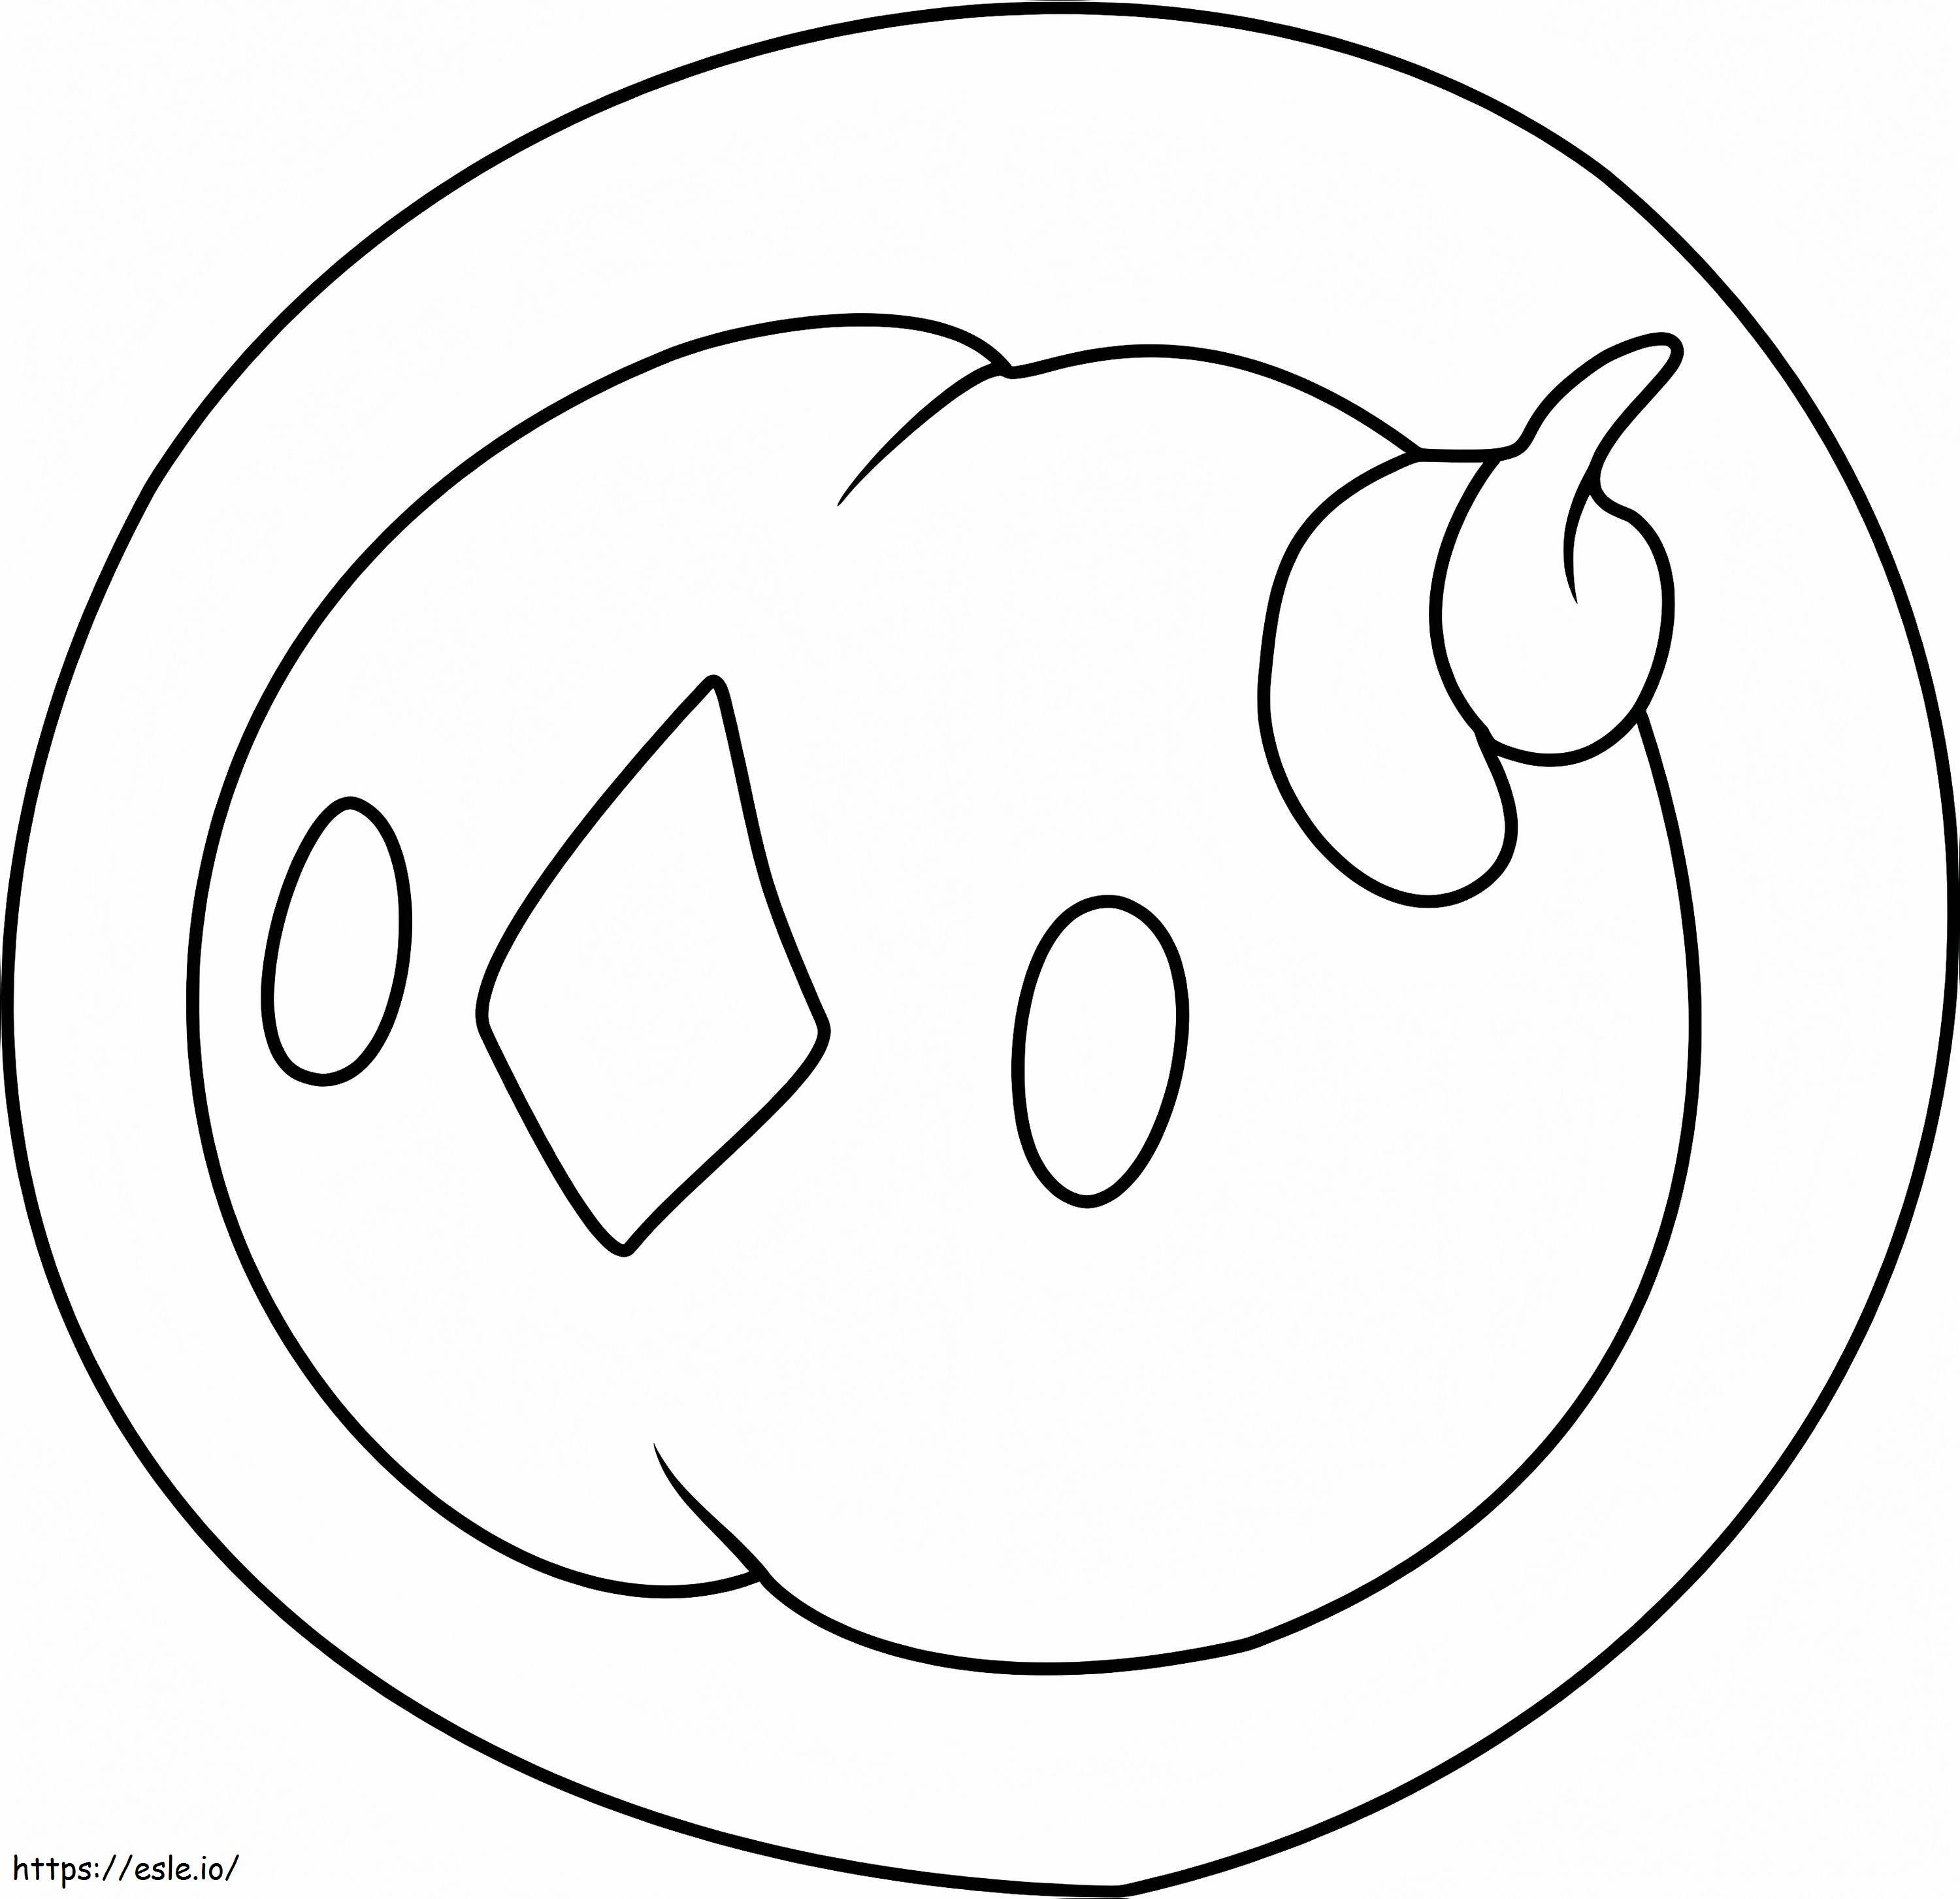 Solosis Gen 5 Pokemon coloring page